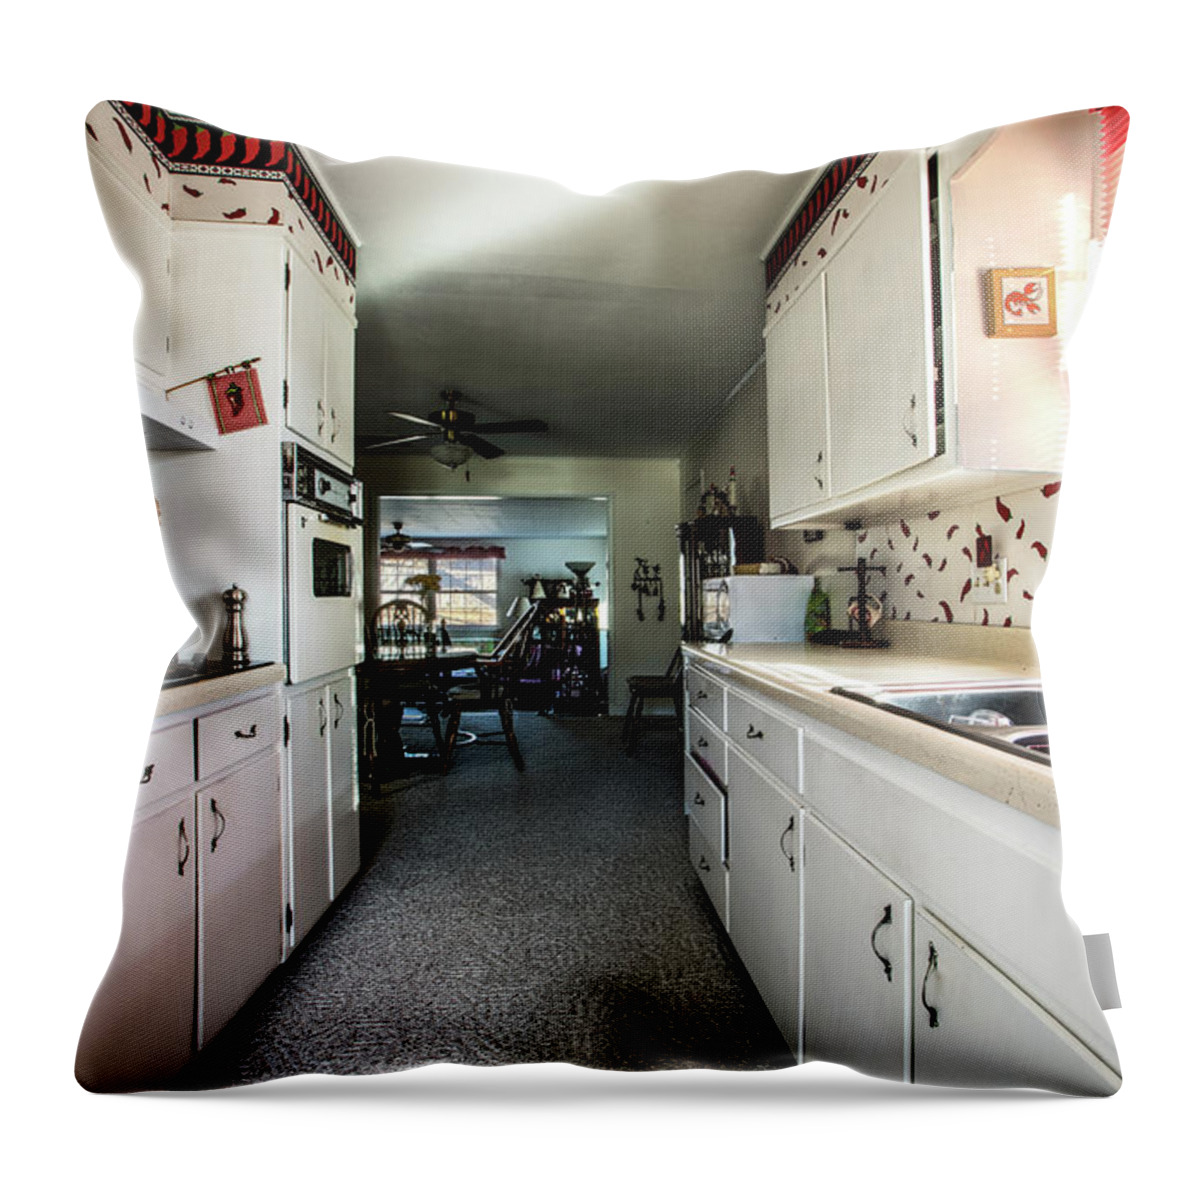 Real Estate Photography Throw Pillow featuring the photograph Sample Galley Kitchen - 908 by Jeff Kurtz